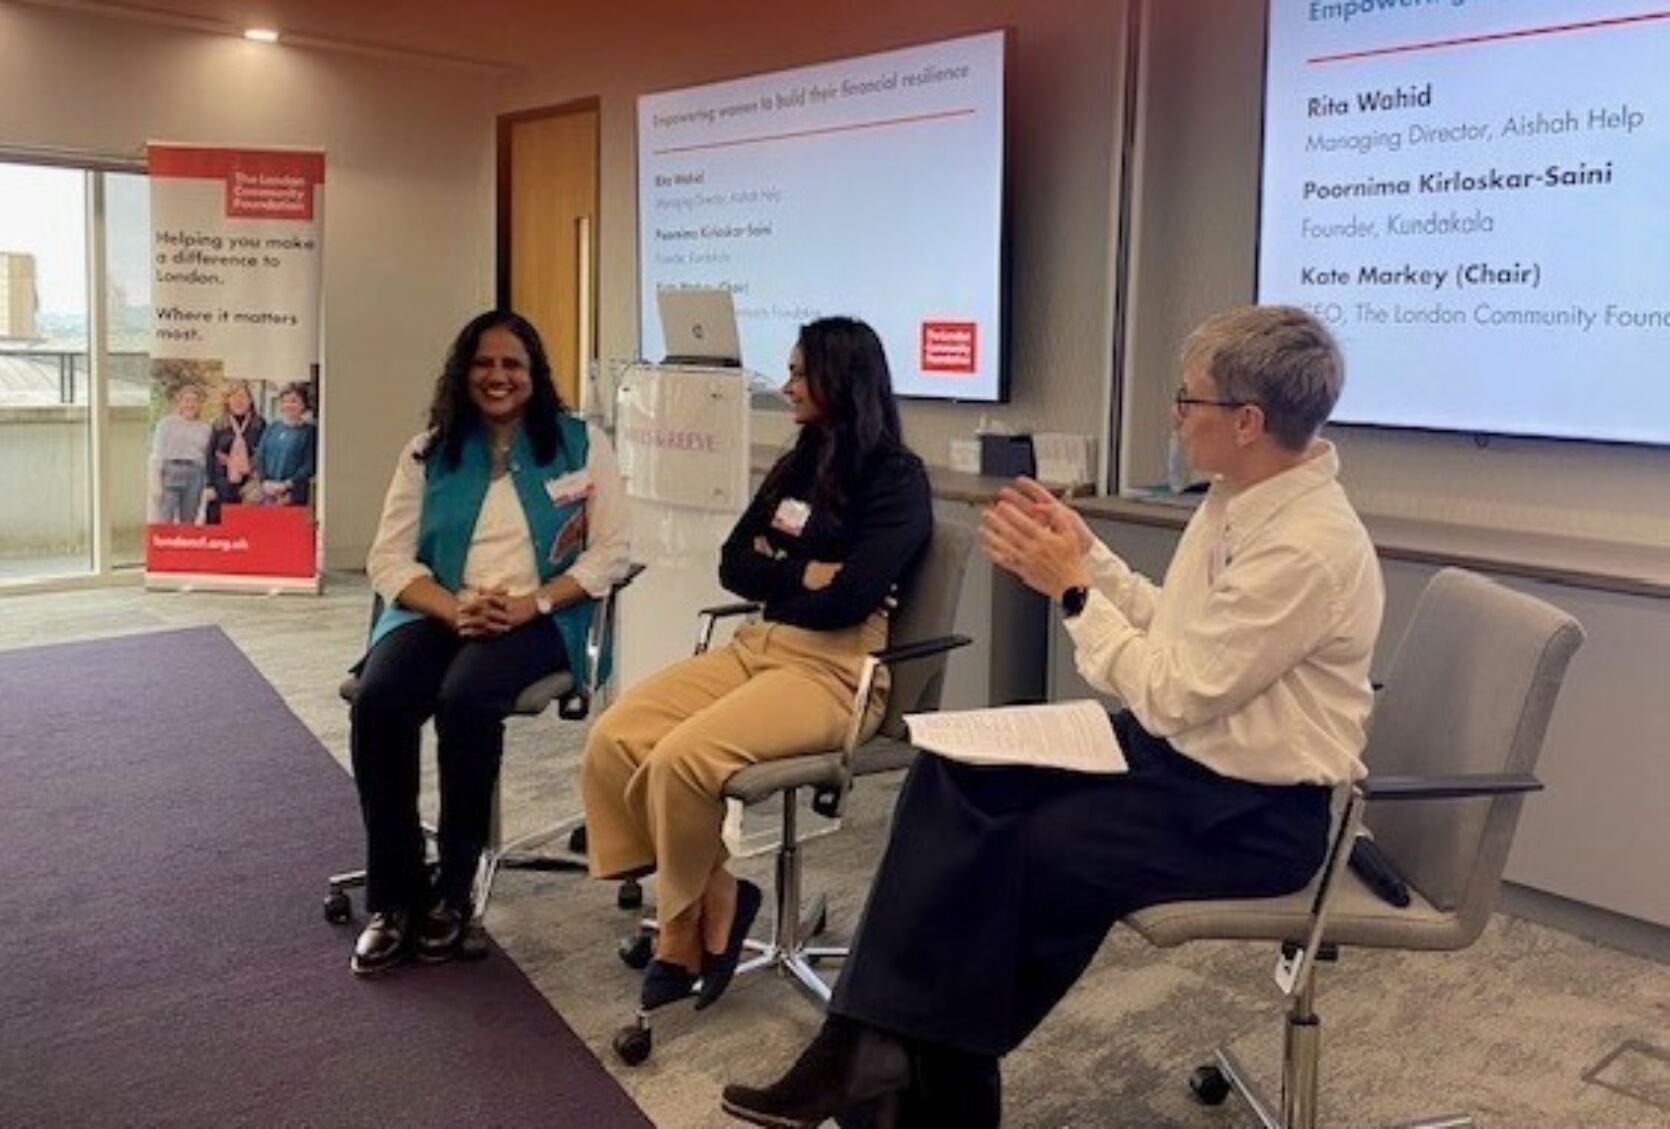 Panellists sharing their experiences at the Women's Fund for London event with CEO Kate Markey - behind them is a large screen, a podium with a laptop on it and a London Community Foundation pull-up banner.